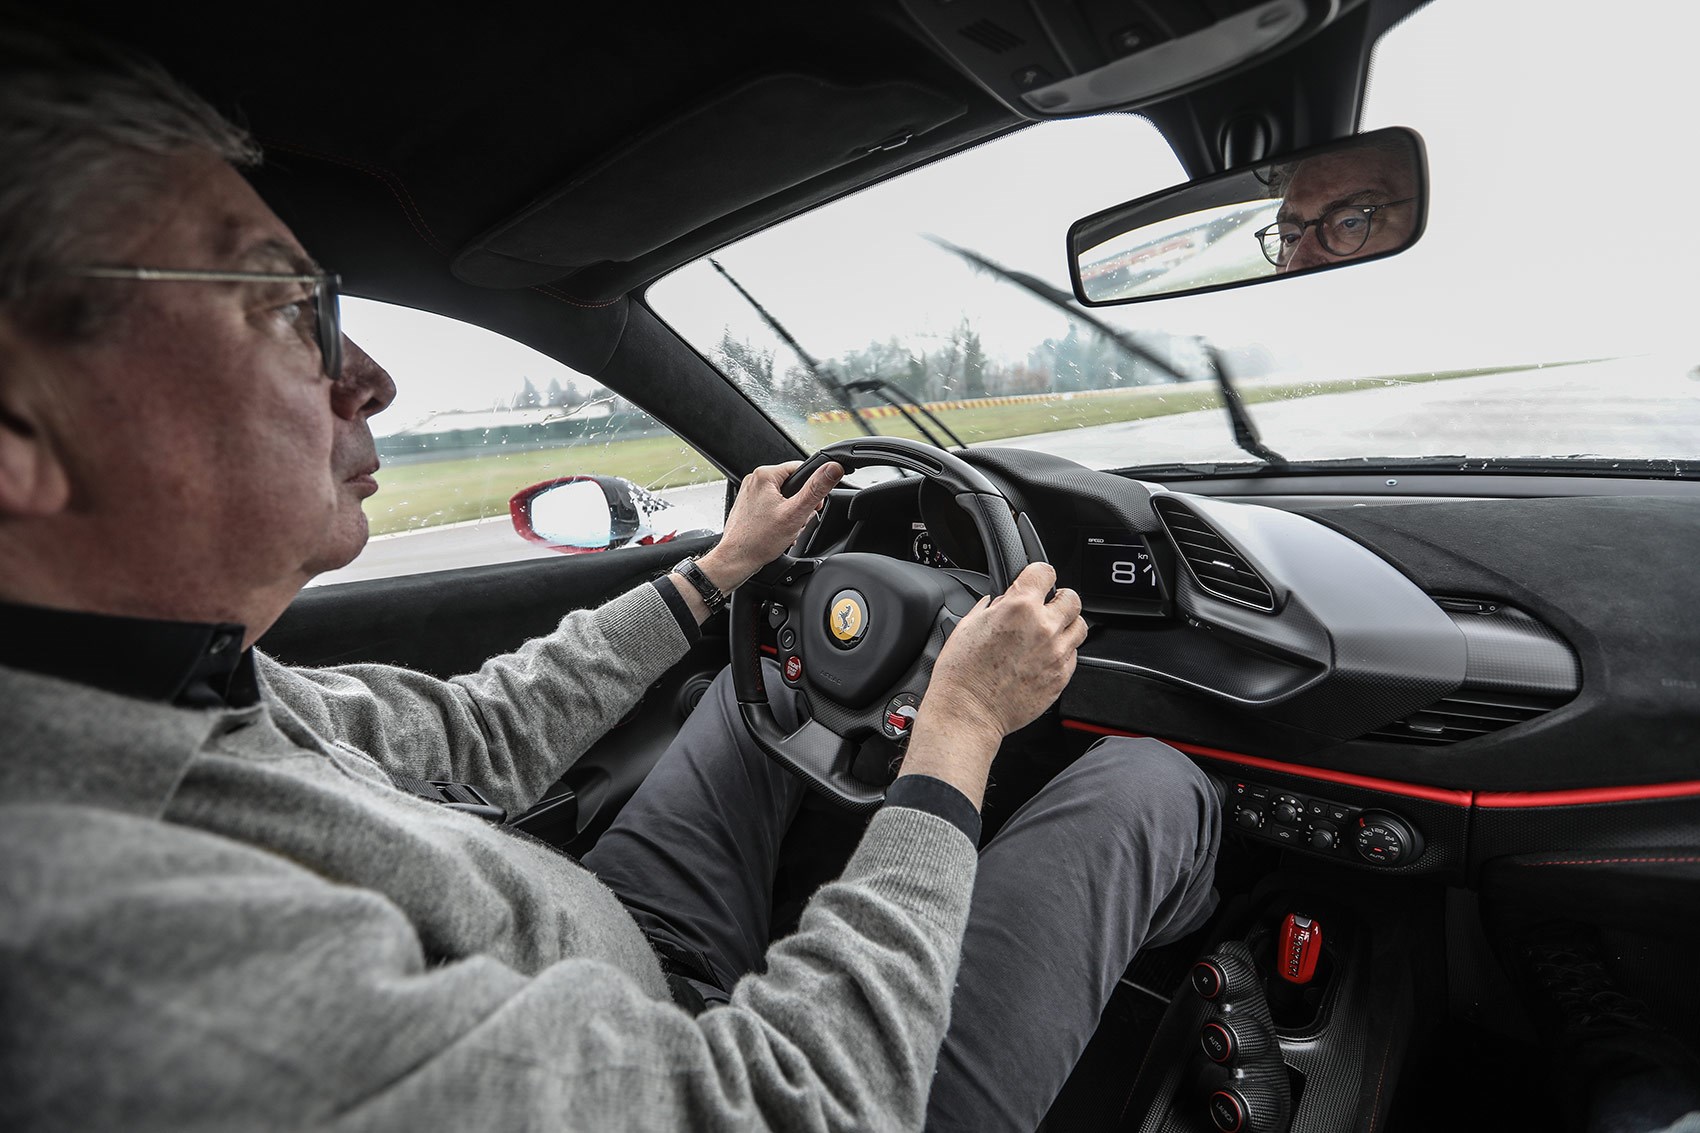 Our Georg Kacher drives the Ferrari 488 Pista on a very cold, snowy day at Fiorano